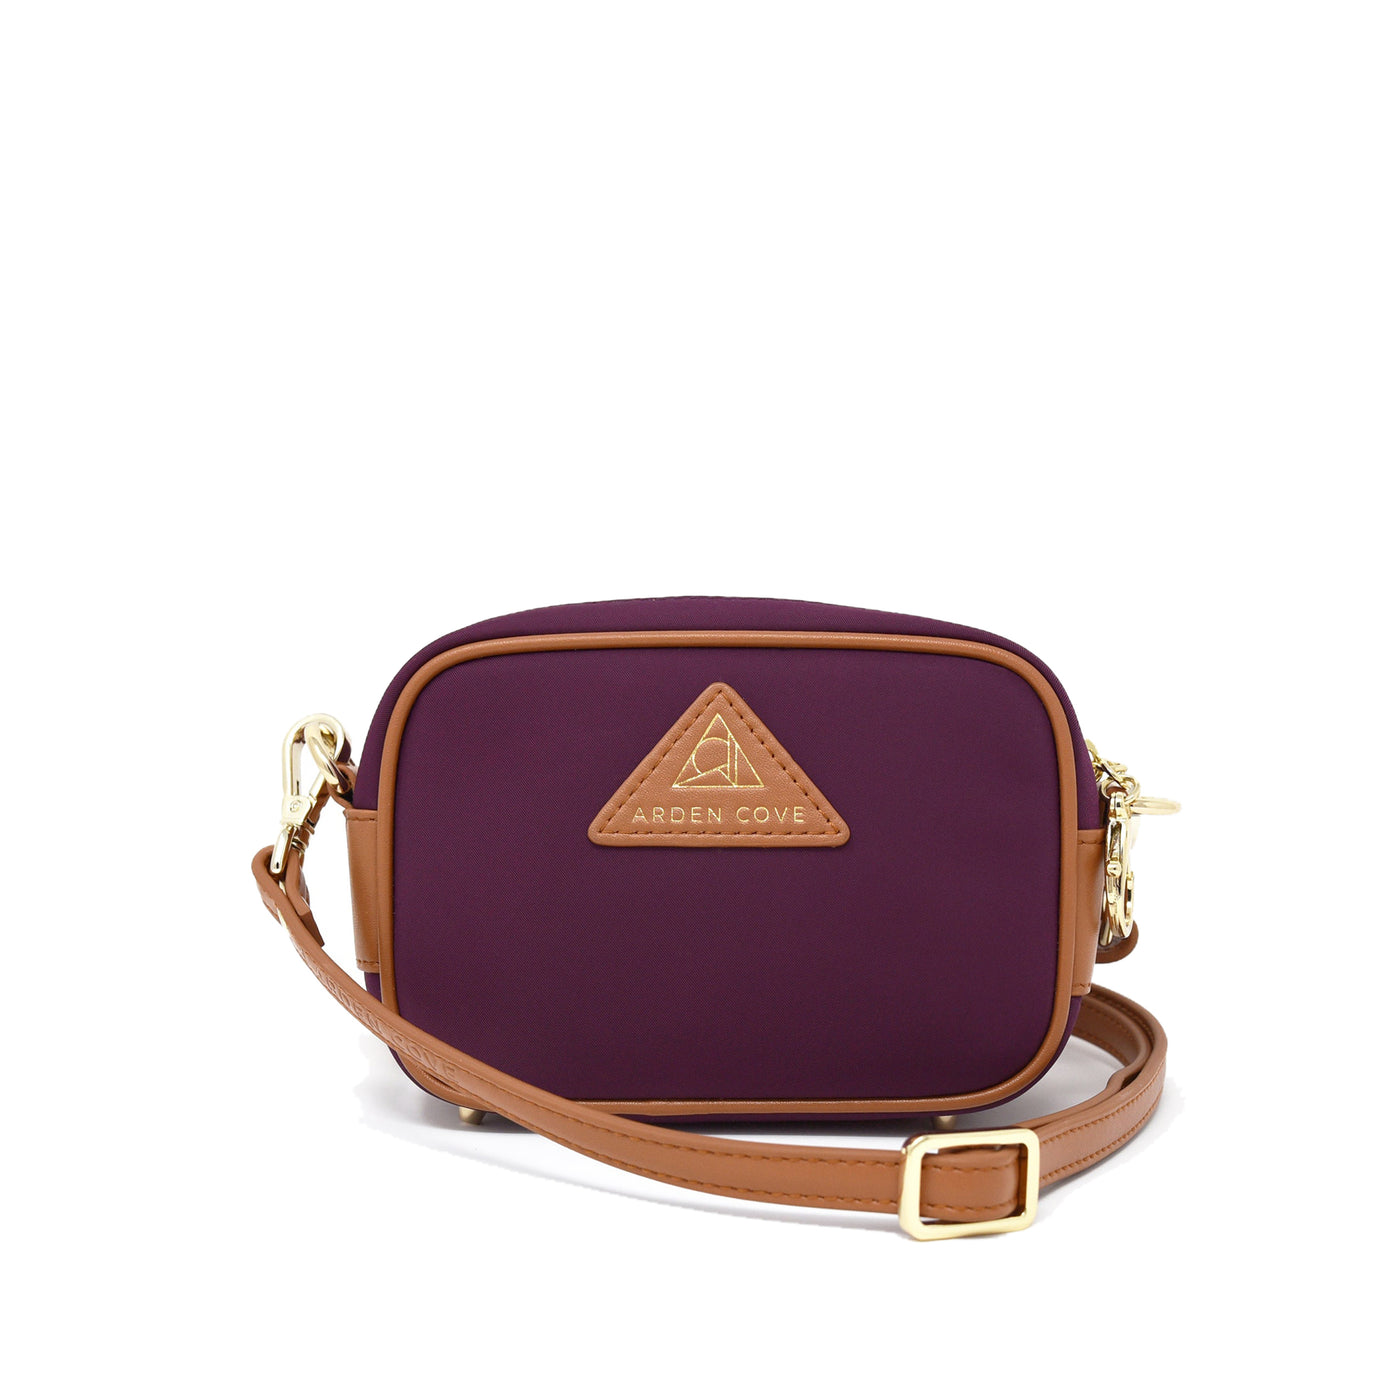 Anti-theft Water-resistant Travel Crossbody - Crissy Mini Crossbody in Maroon Gold with slash-resistant faux leather & classic clasps straps - front view - Arden Cove